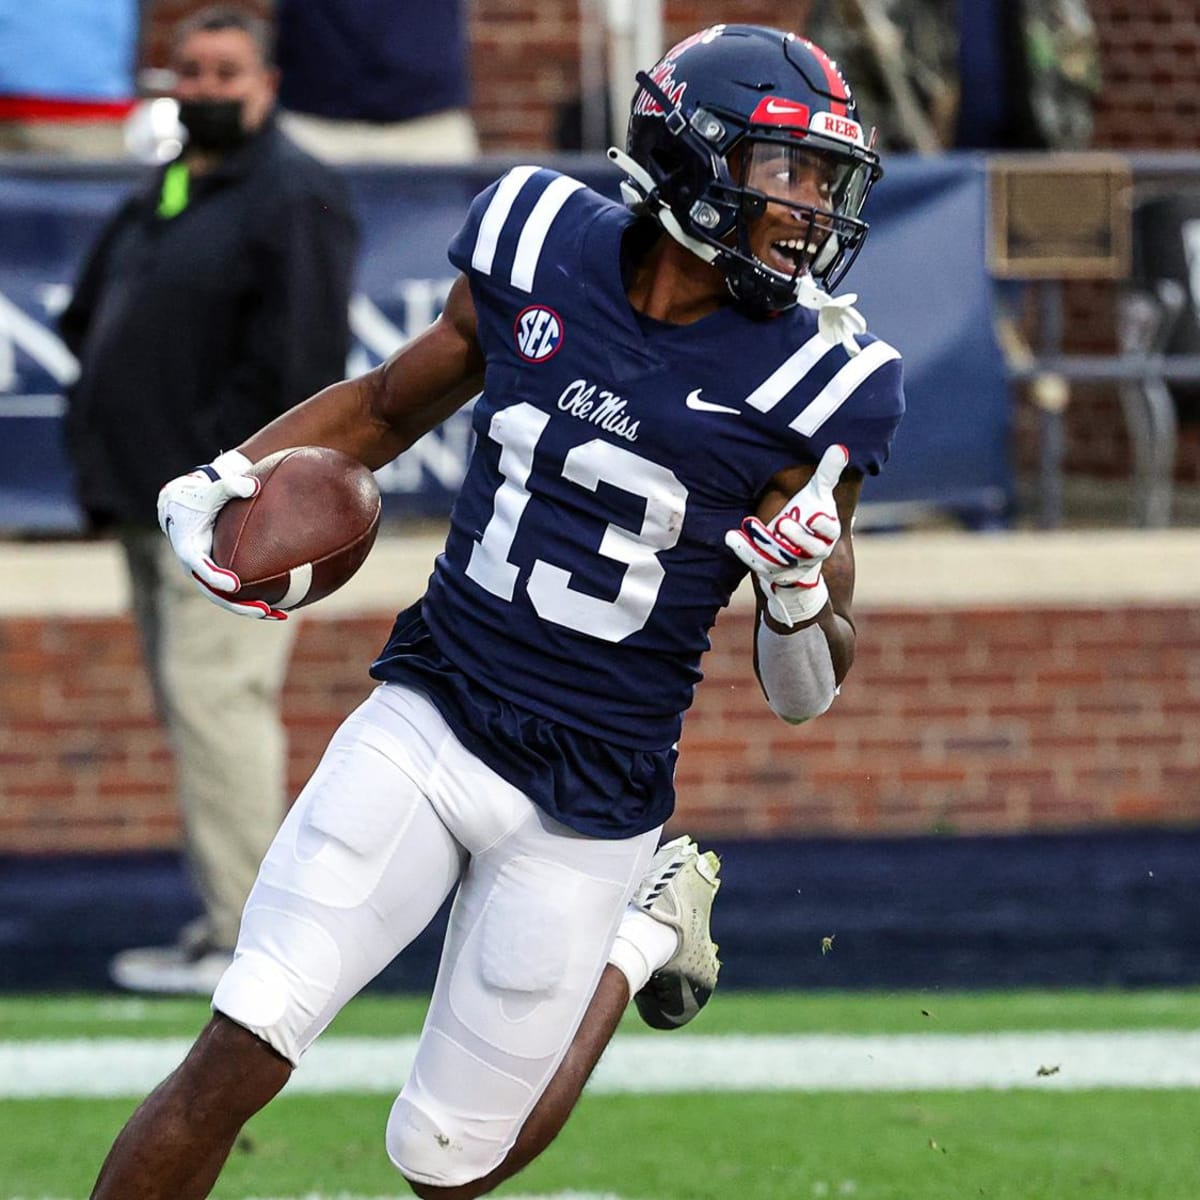 NFL Combine: Ole Miss Running Backs Jerrion Ealy, Snoop Conner Show Out in  Indy - The Rebel Walk